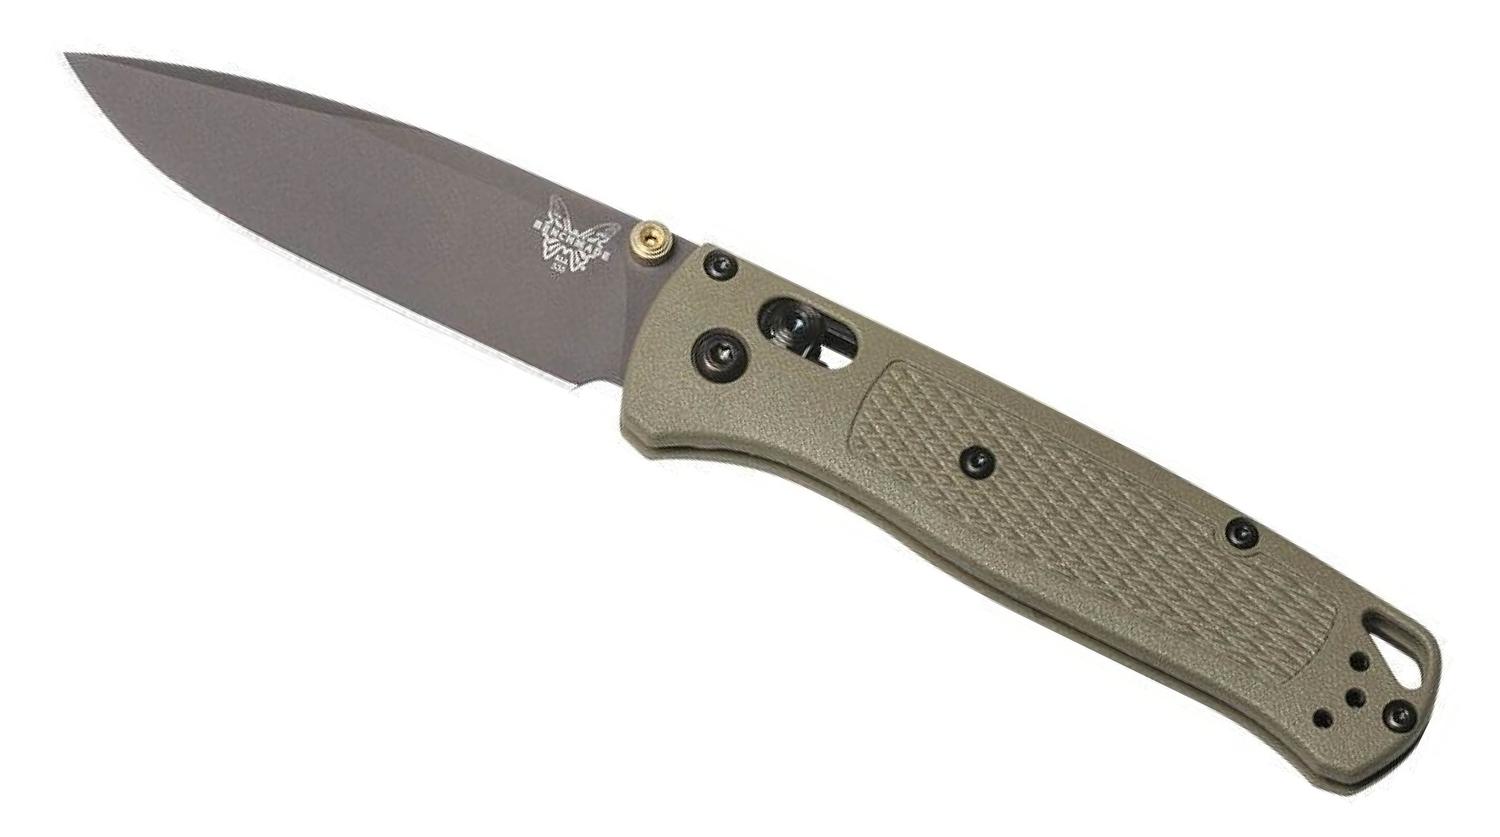  535 Bugout Manual Folding Knife 3.24in S30v Gray Coated